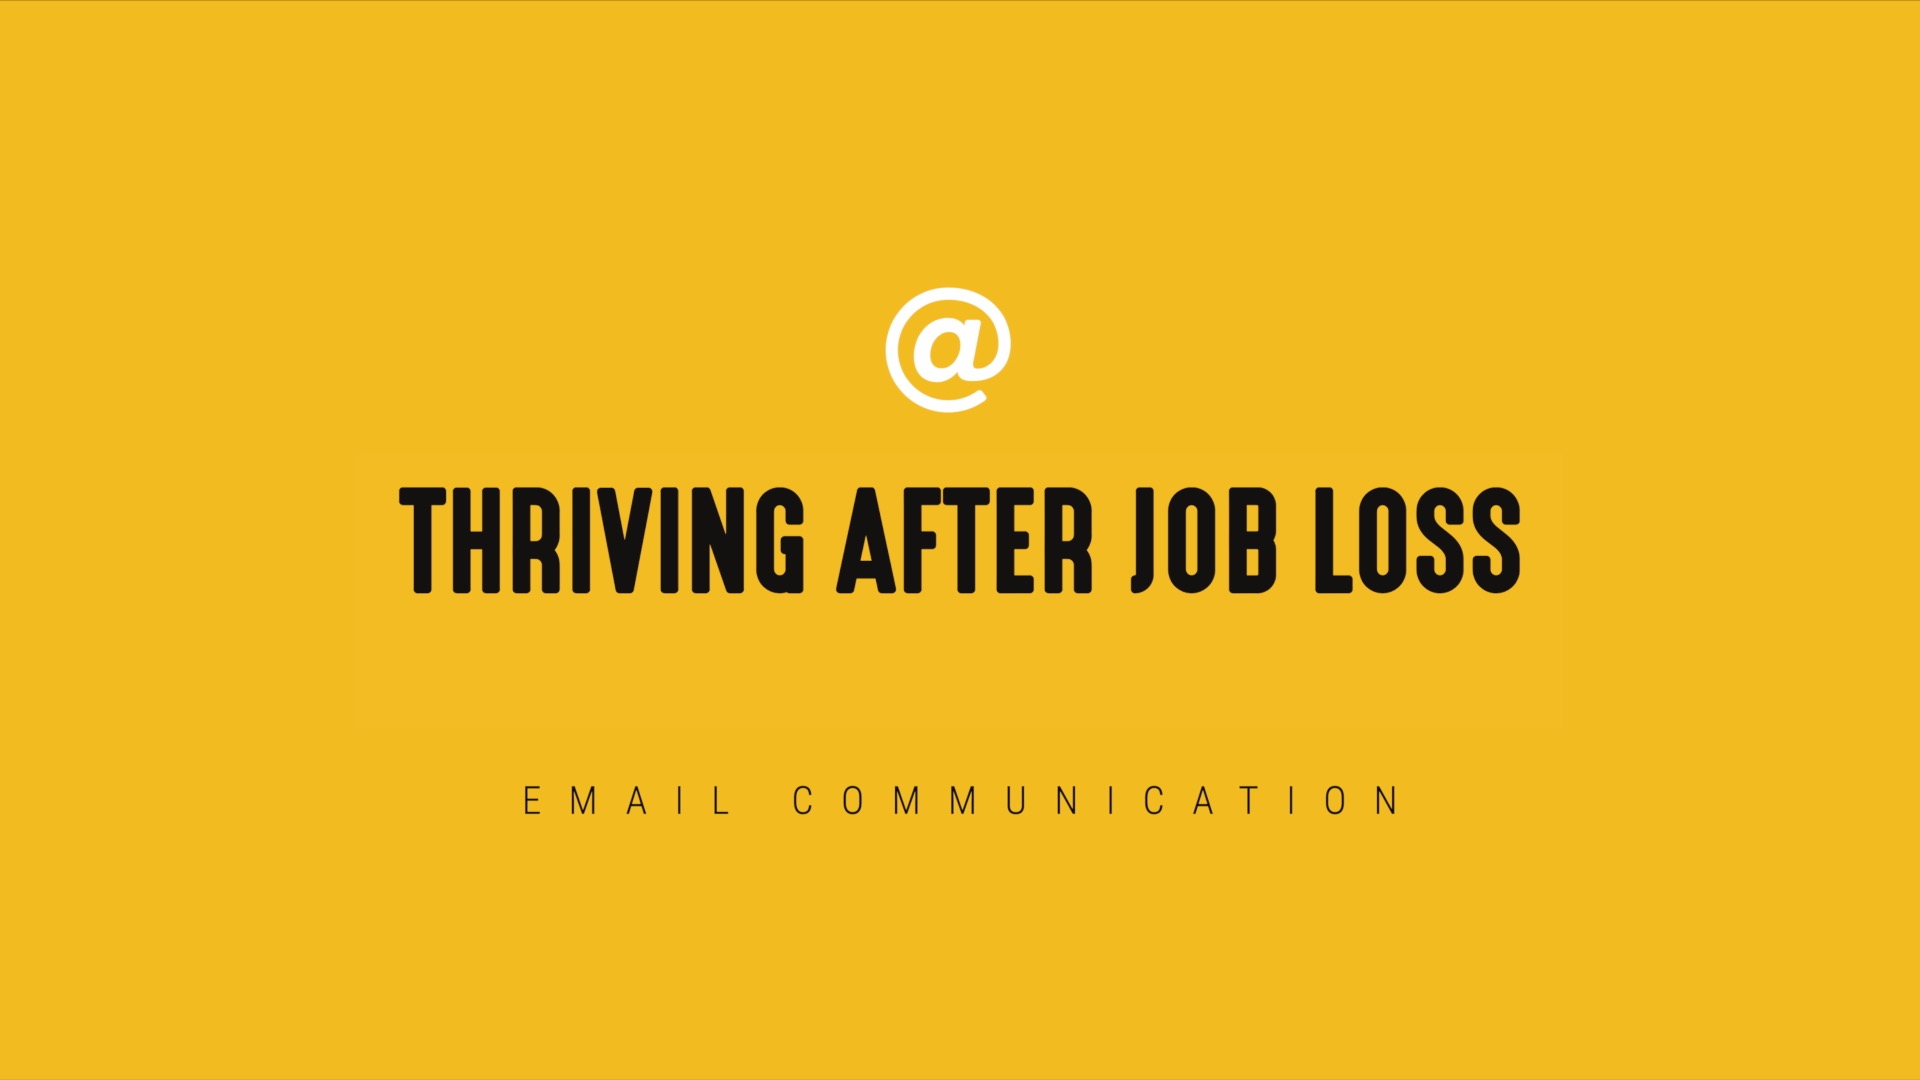 [NEW] Thriving After Job Loss - Single Topic Email